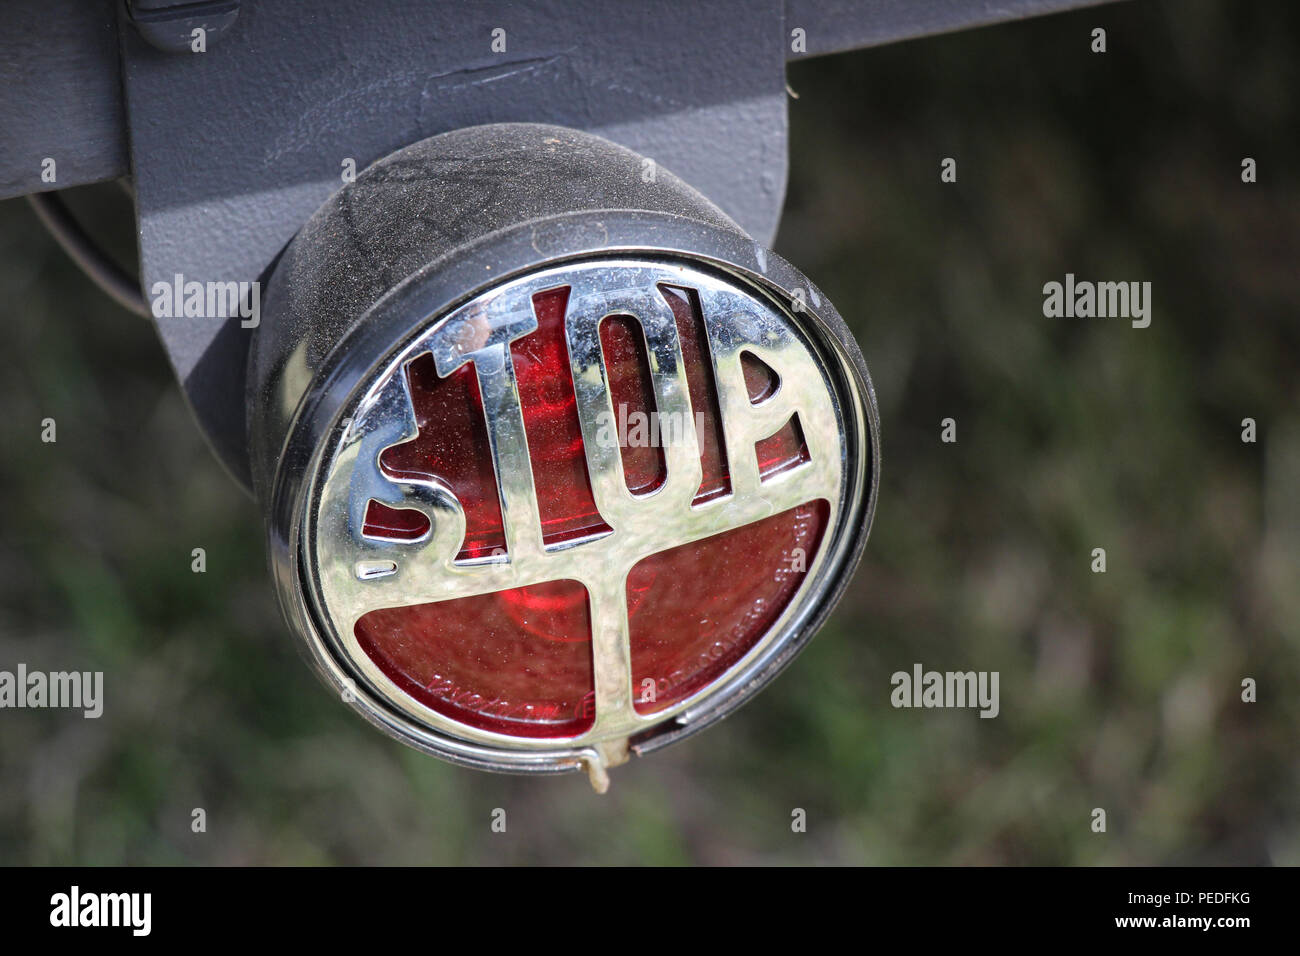 Woolley Moor show. 11th August 2018. A unique looking stop light on a hot rod car. Credit: Robert Slater Stock Photo